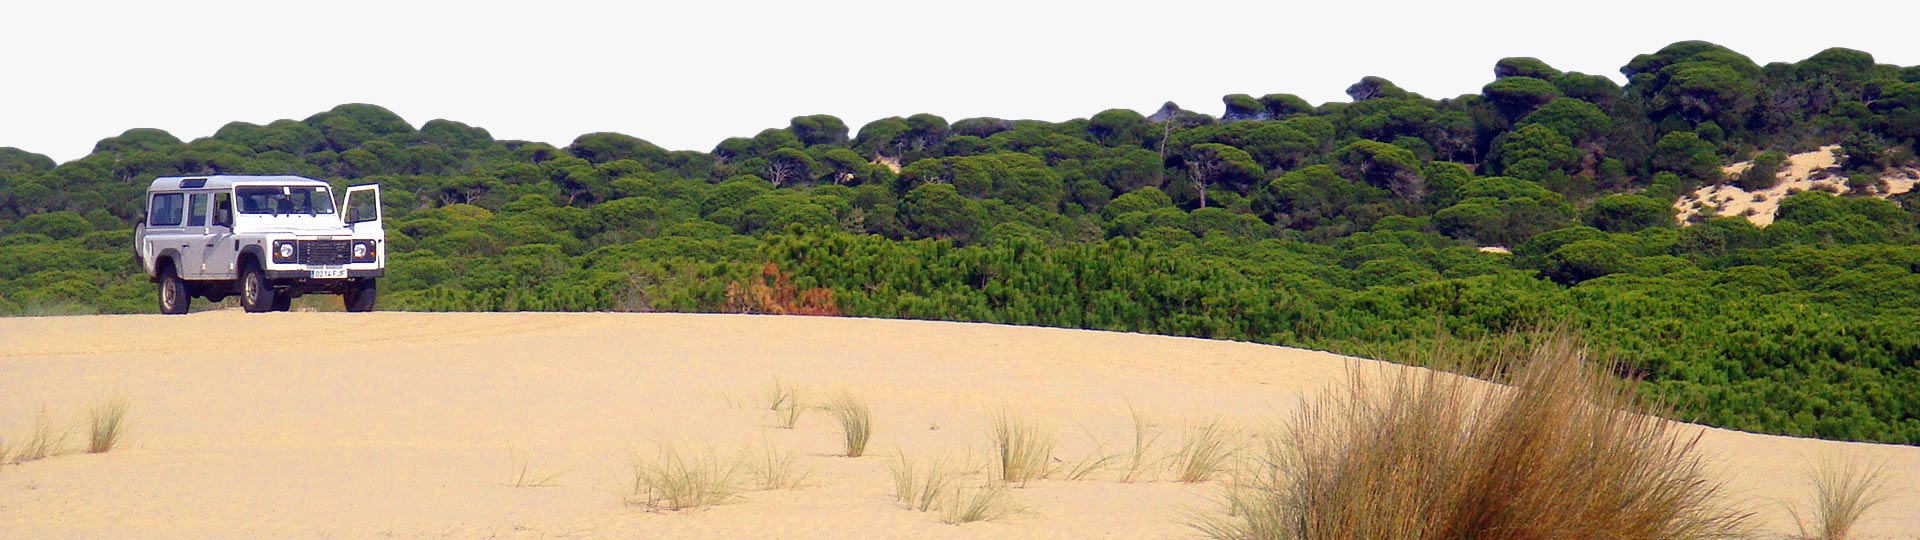 Off-roading in the Doñana National Park in Huelva (Andalusia)